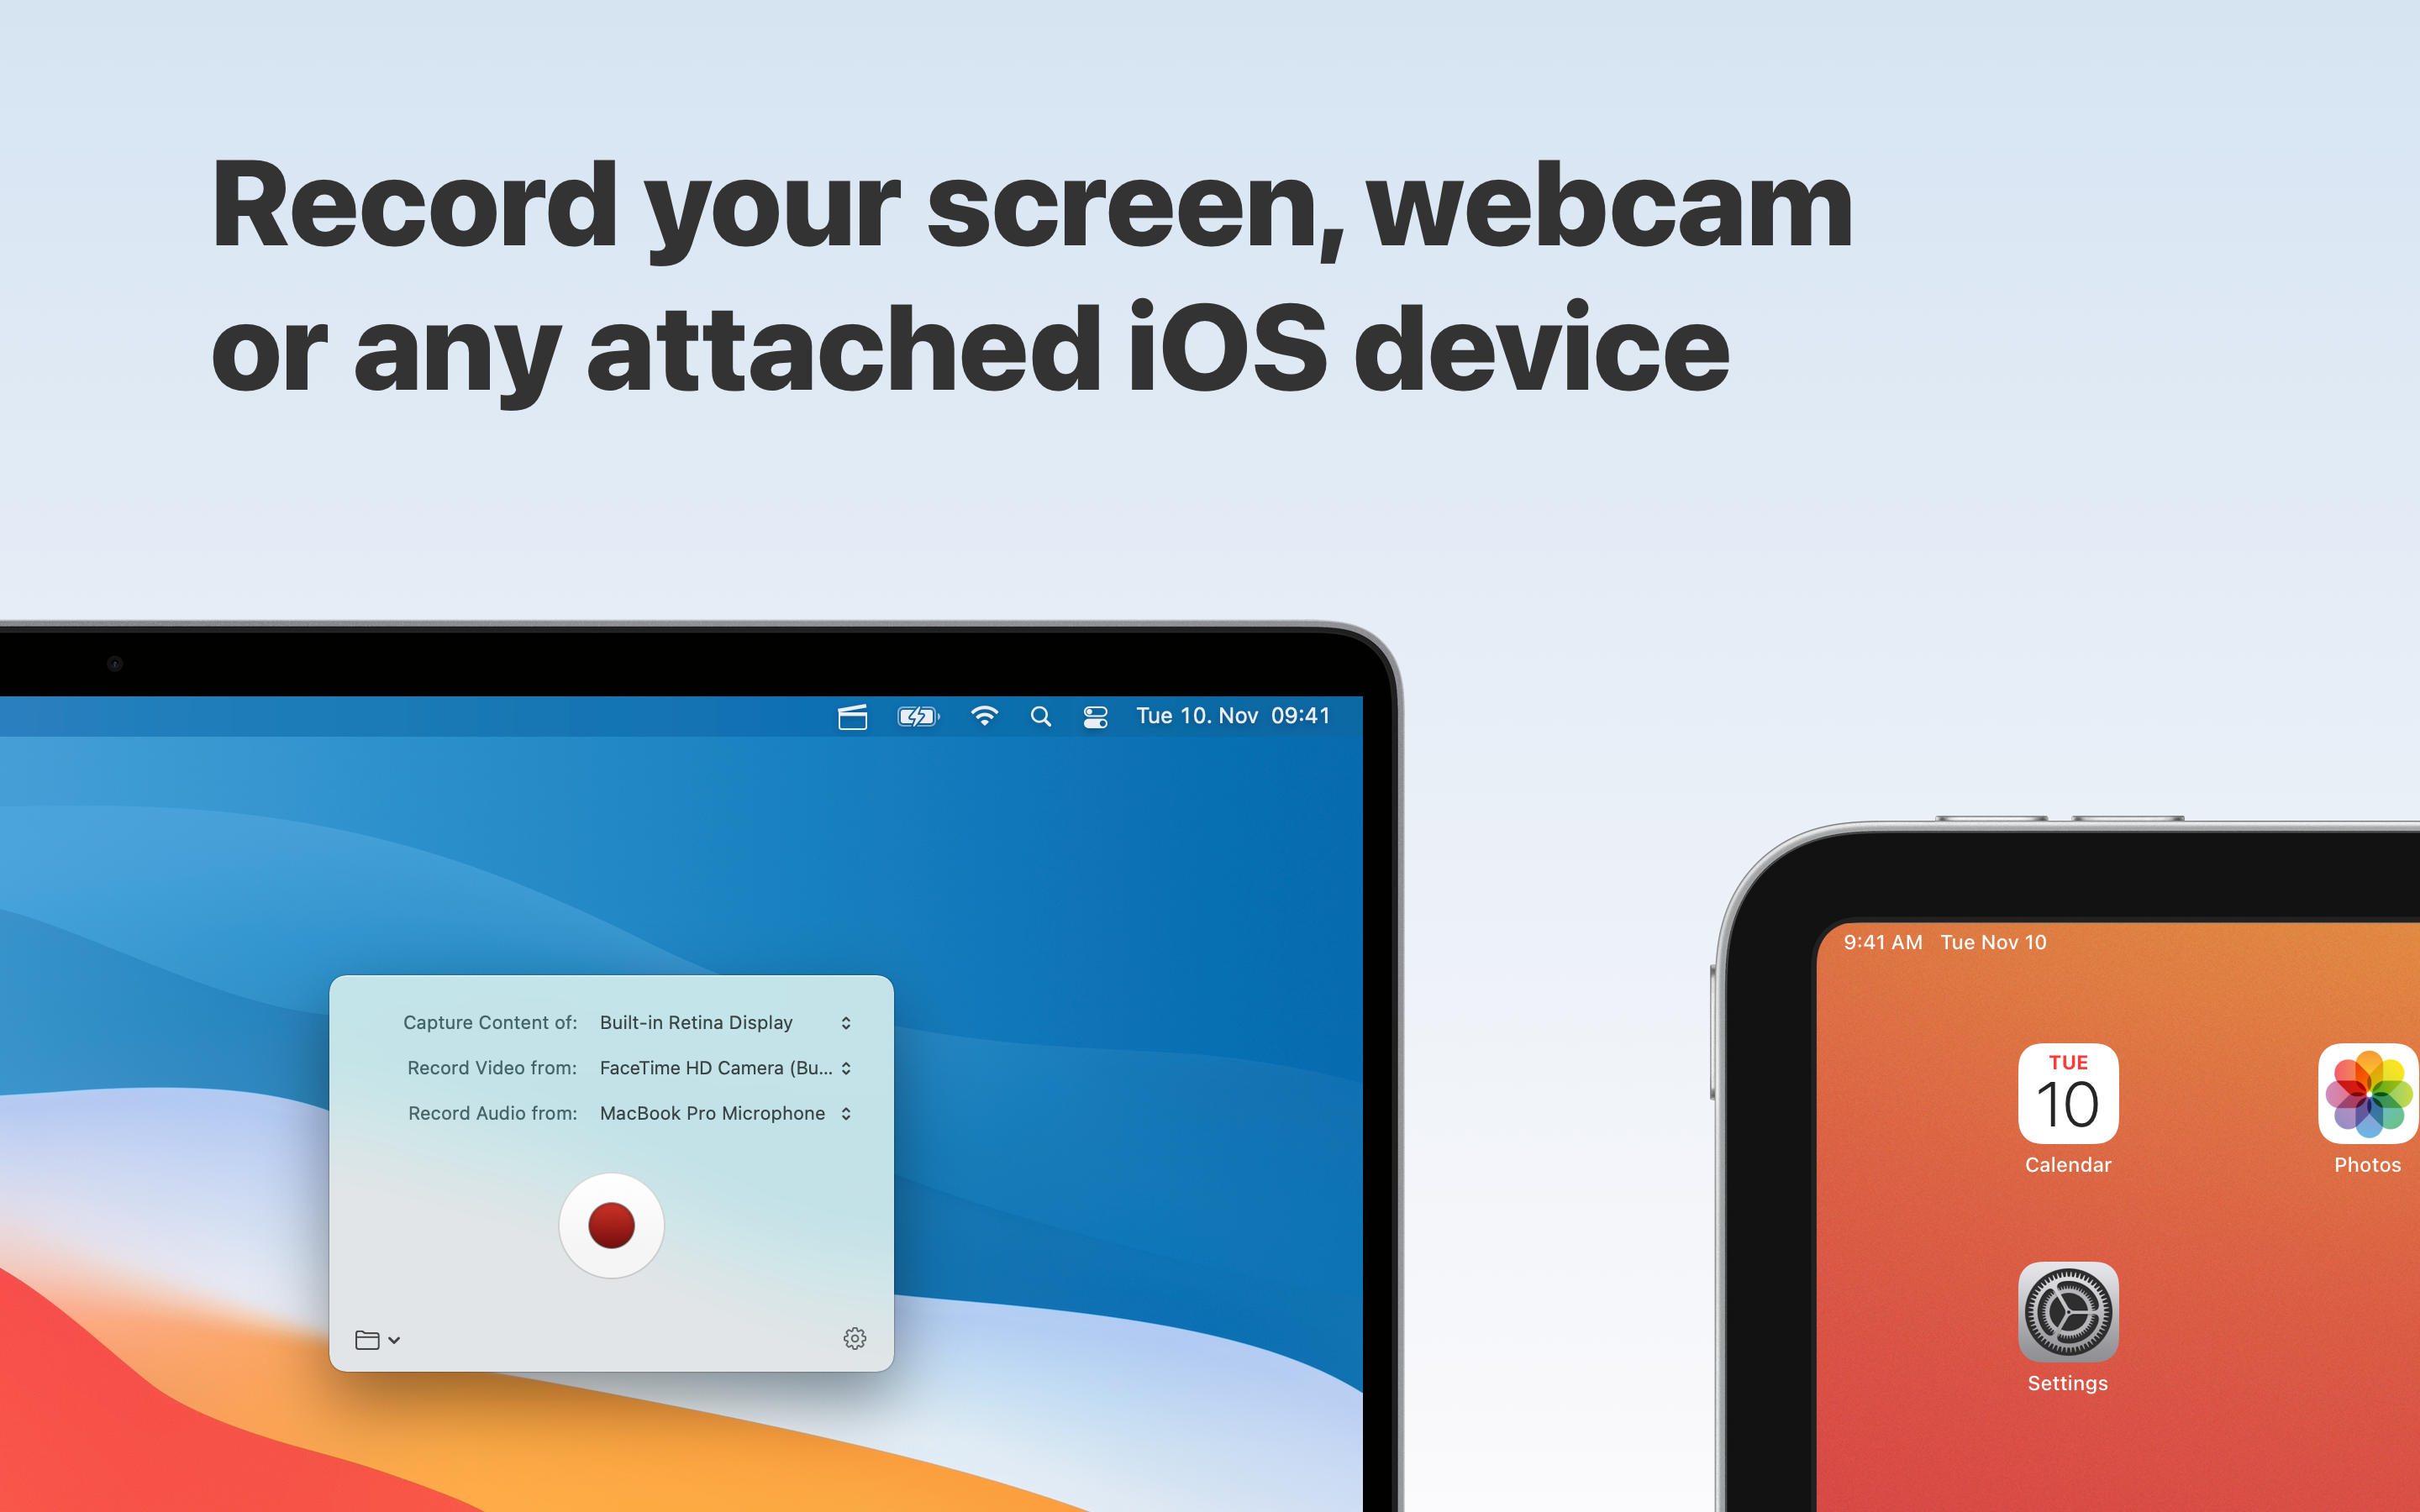 Record your screen, webcam or any attached iOS device